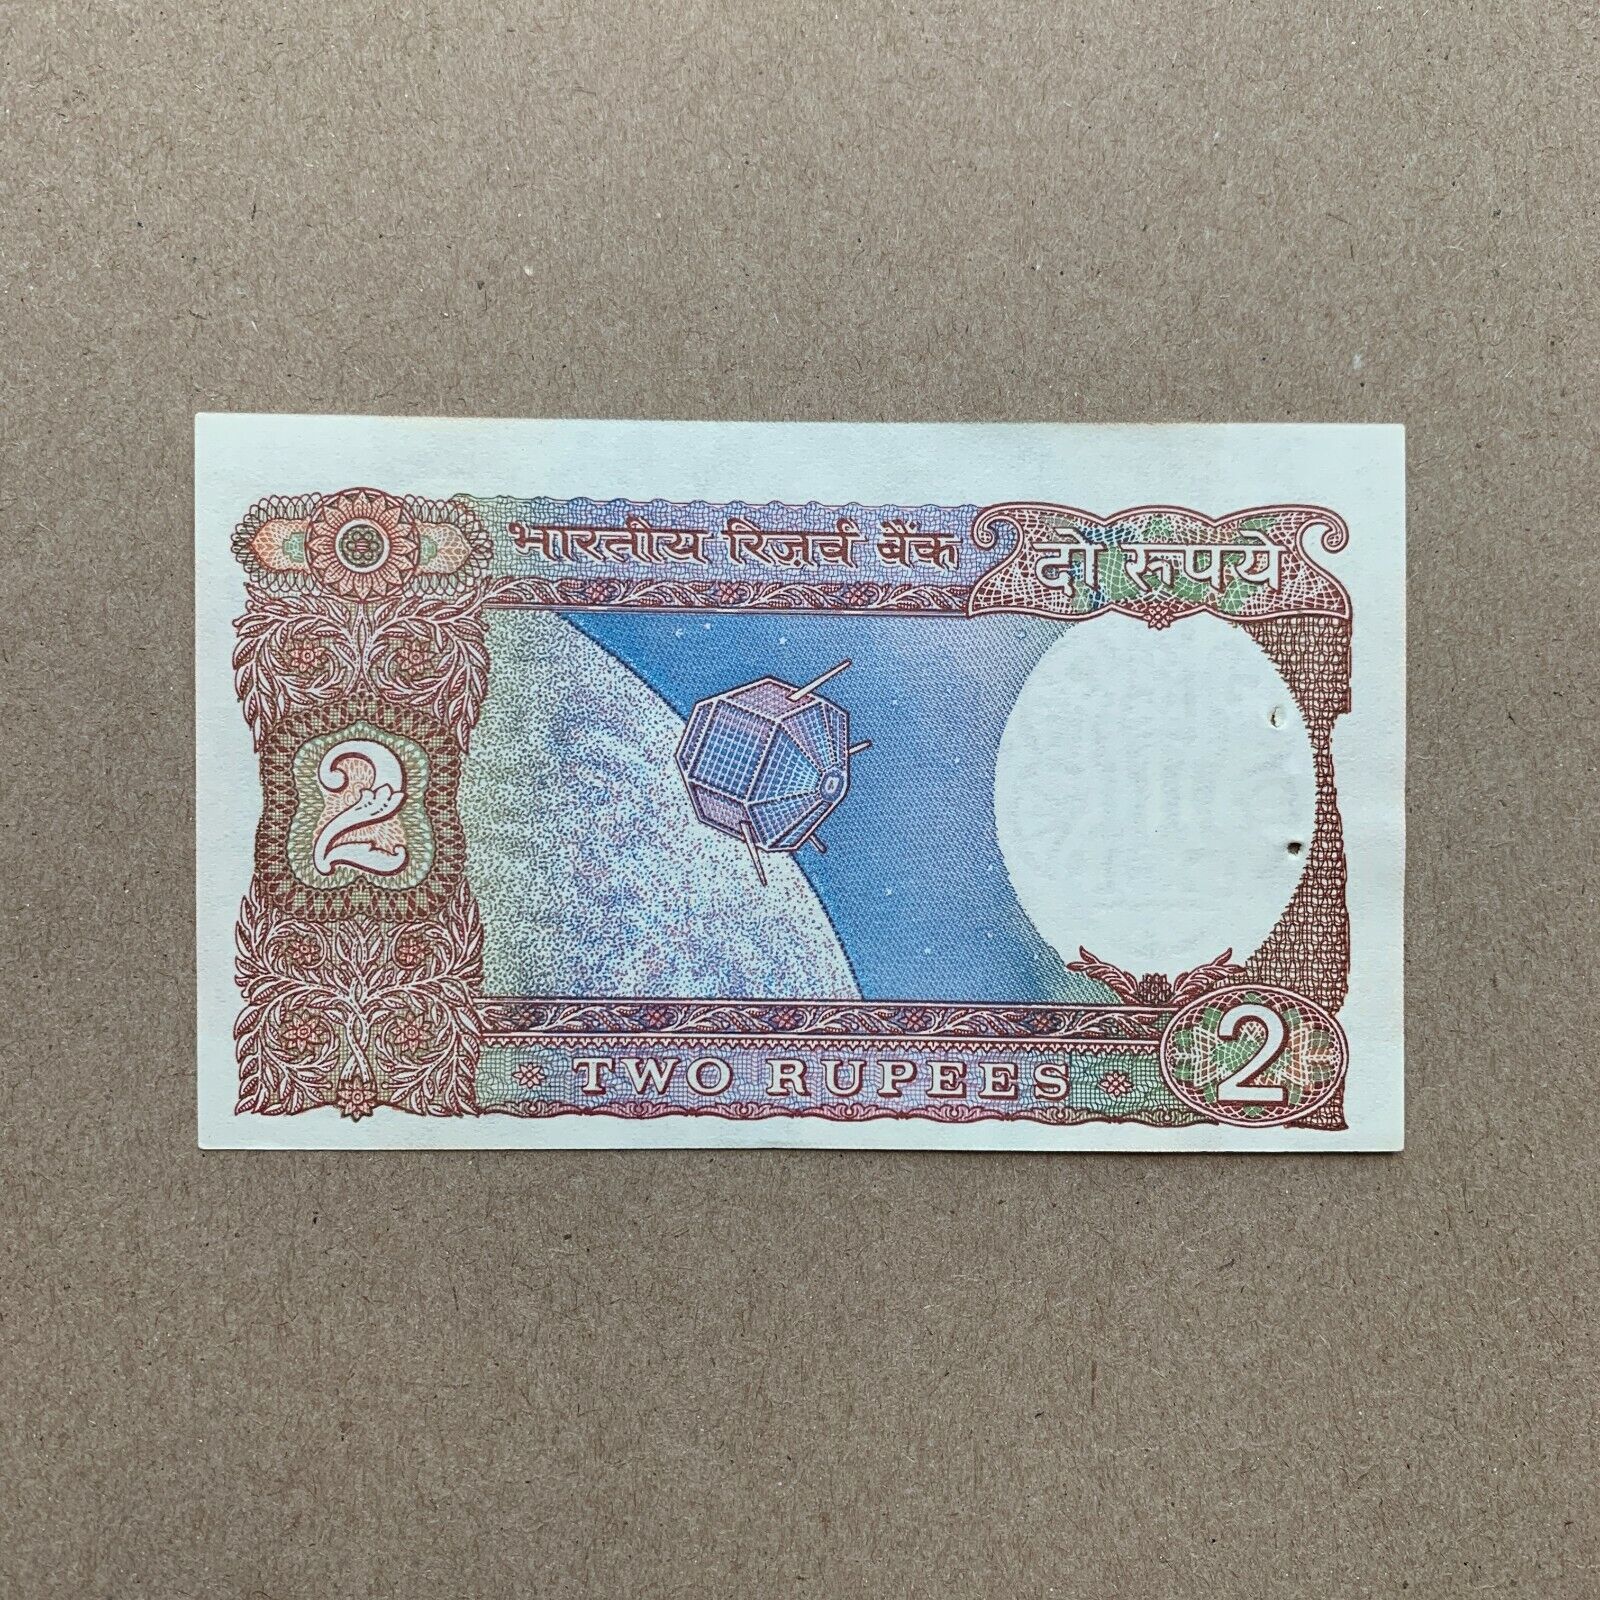 FIRST INDIAN SATTALITE India 2 Rupees Banknote J UNC Currency Paper Money NOTE